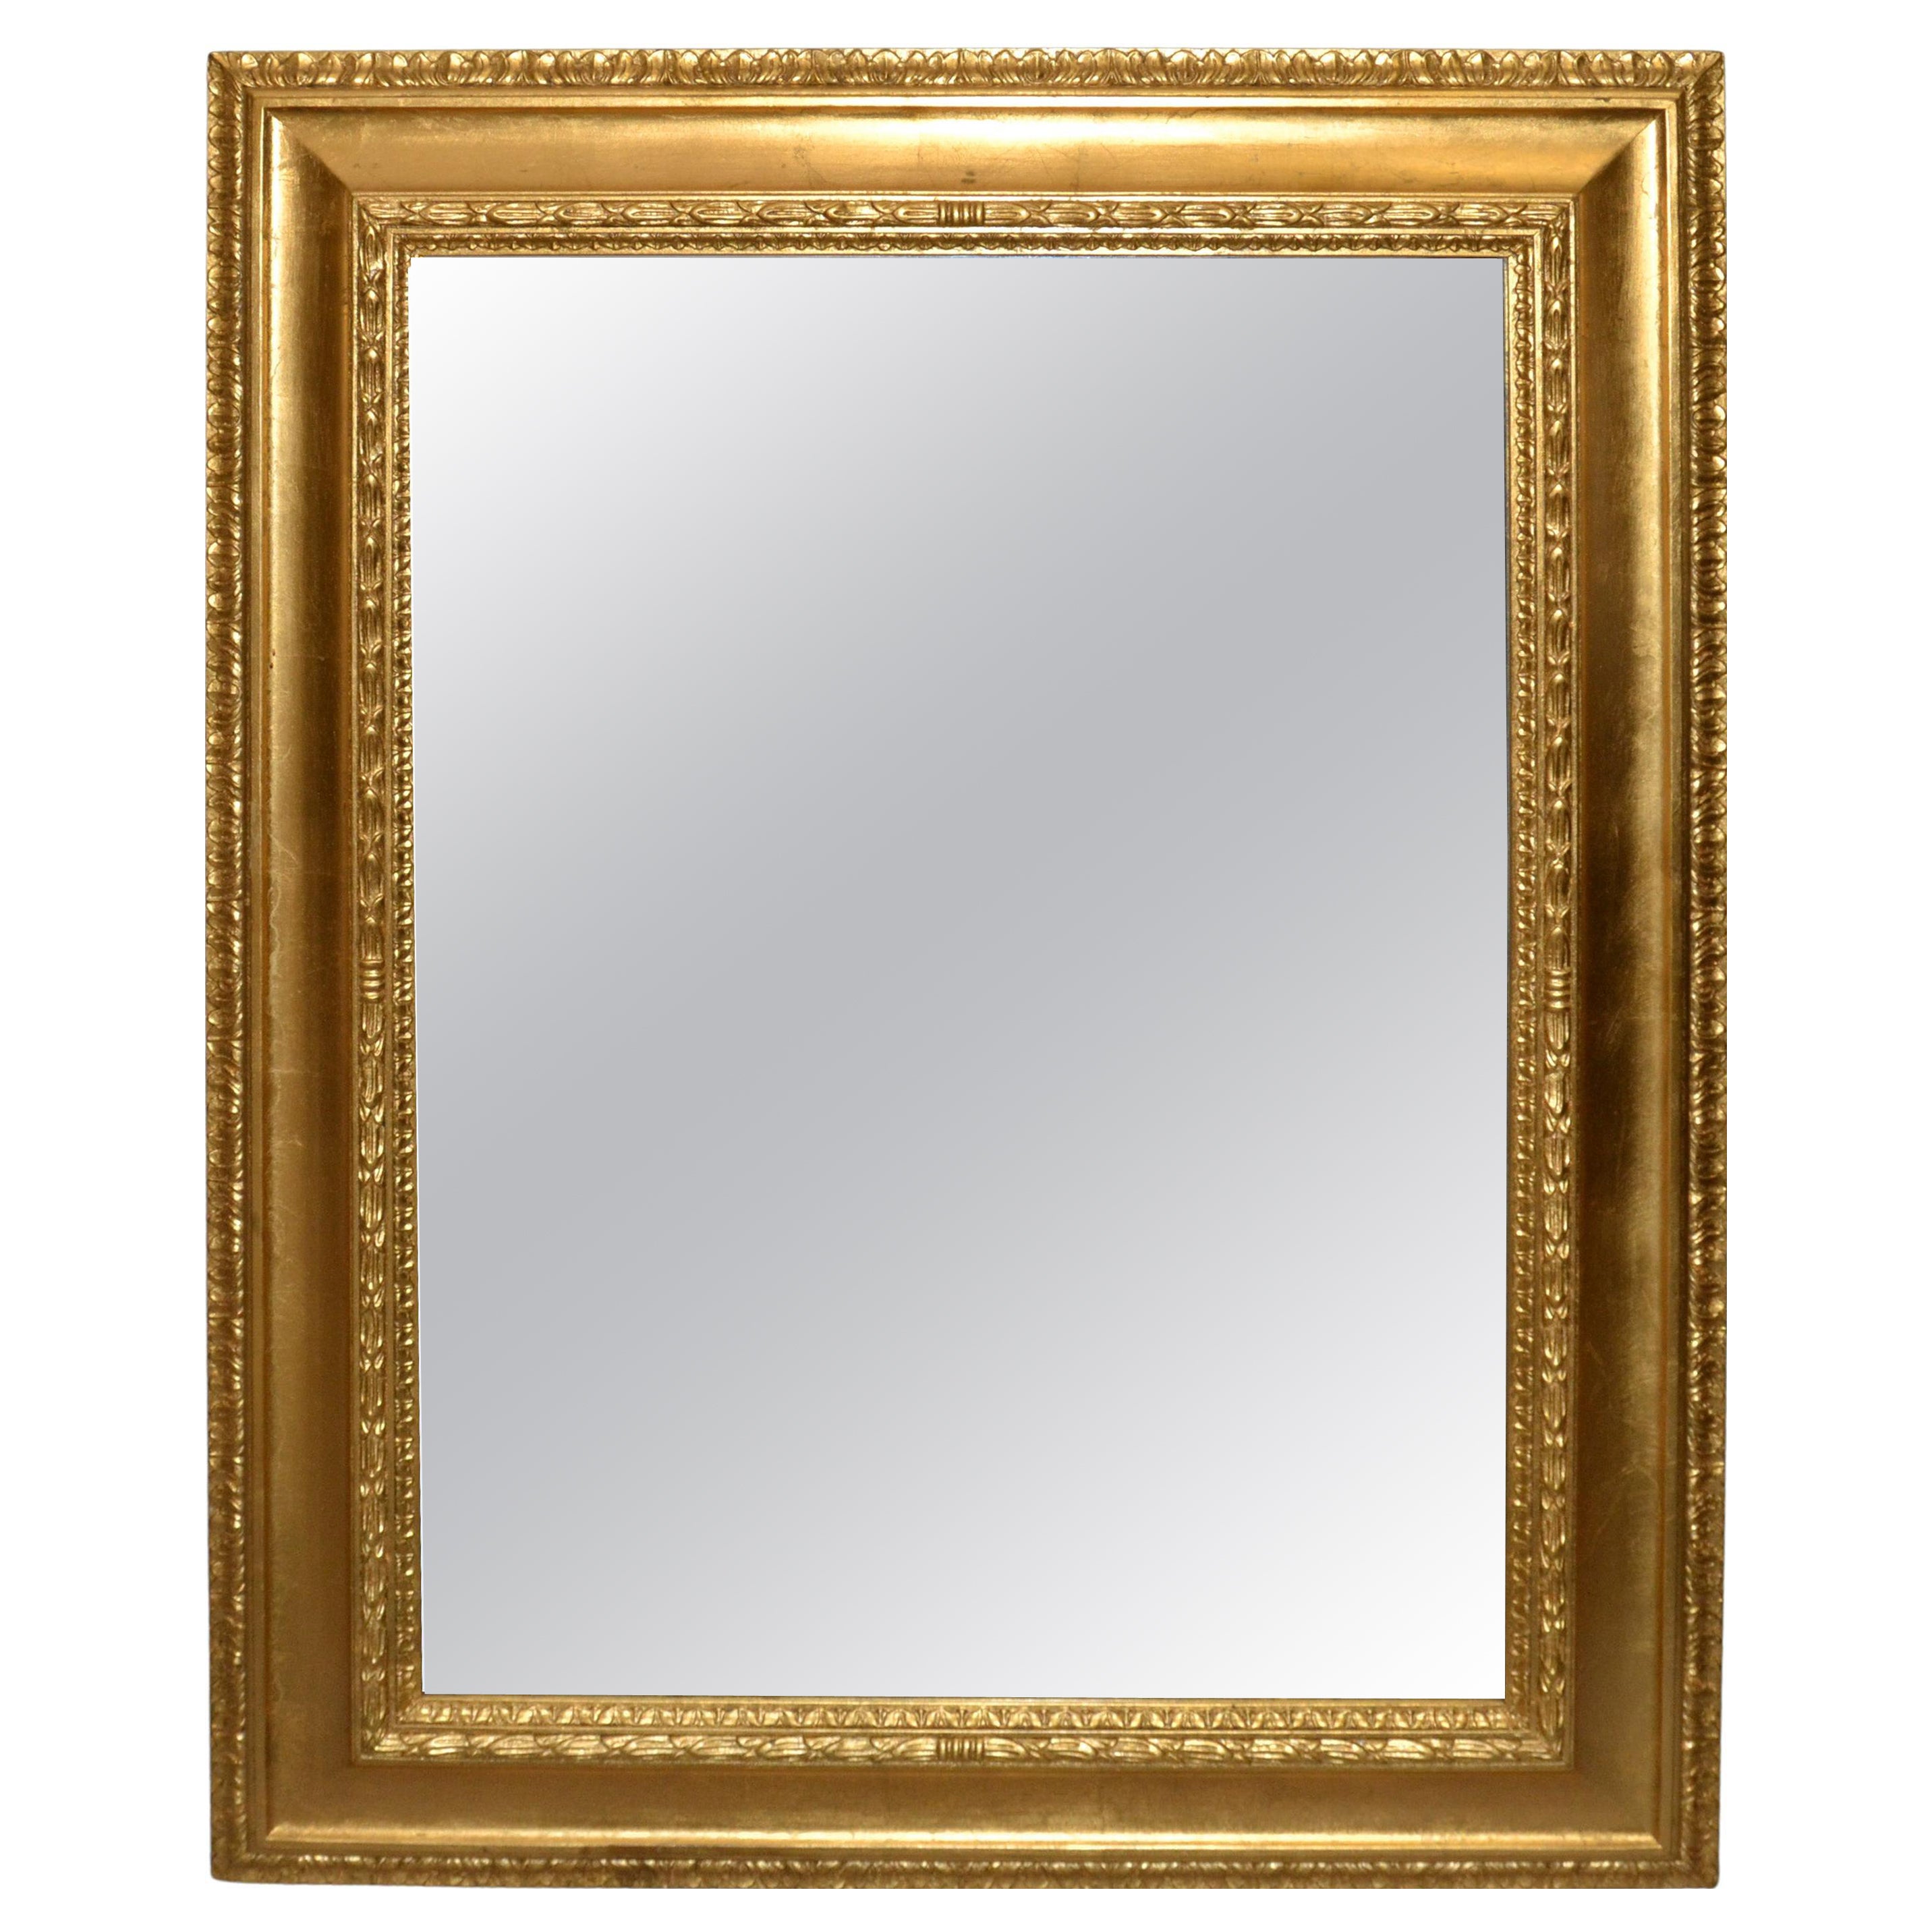 Italian Neoclassical Regency Rectangle Gilded Wall Mirror, 1930s For Sale